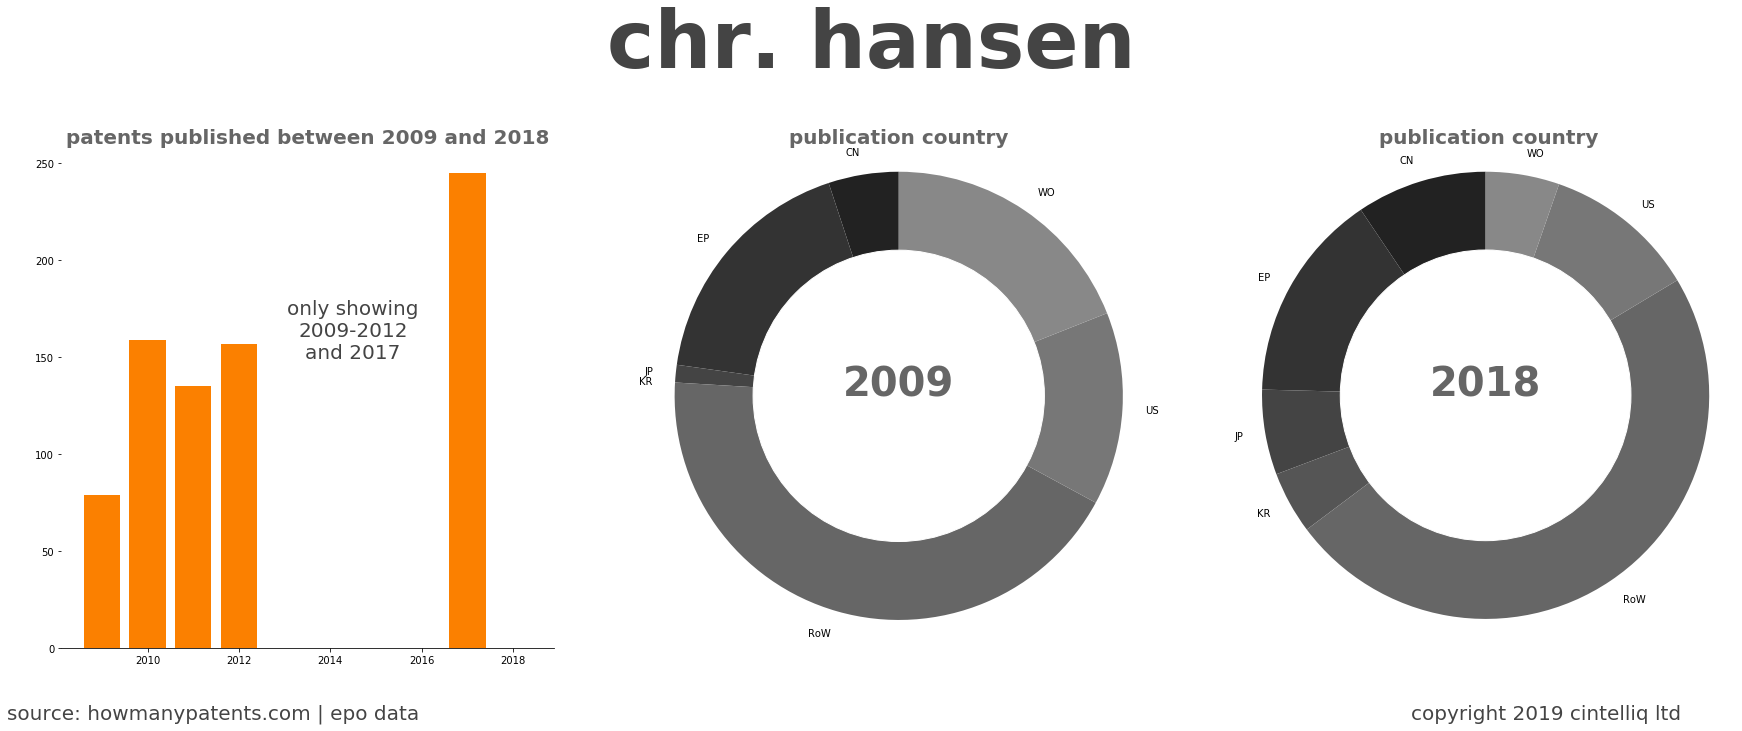 summary of patents for Chr. Hansen